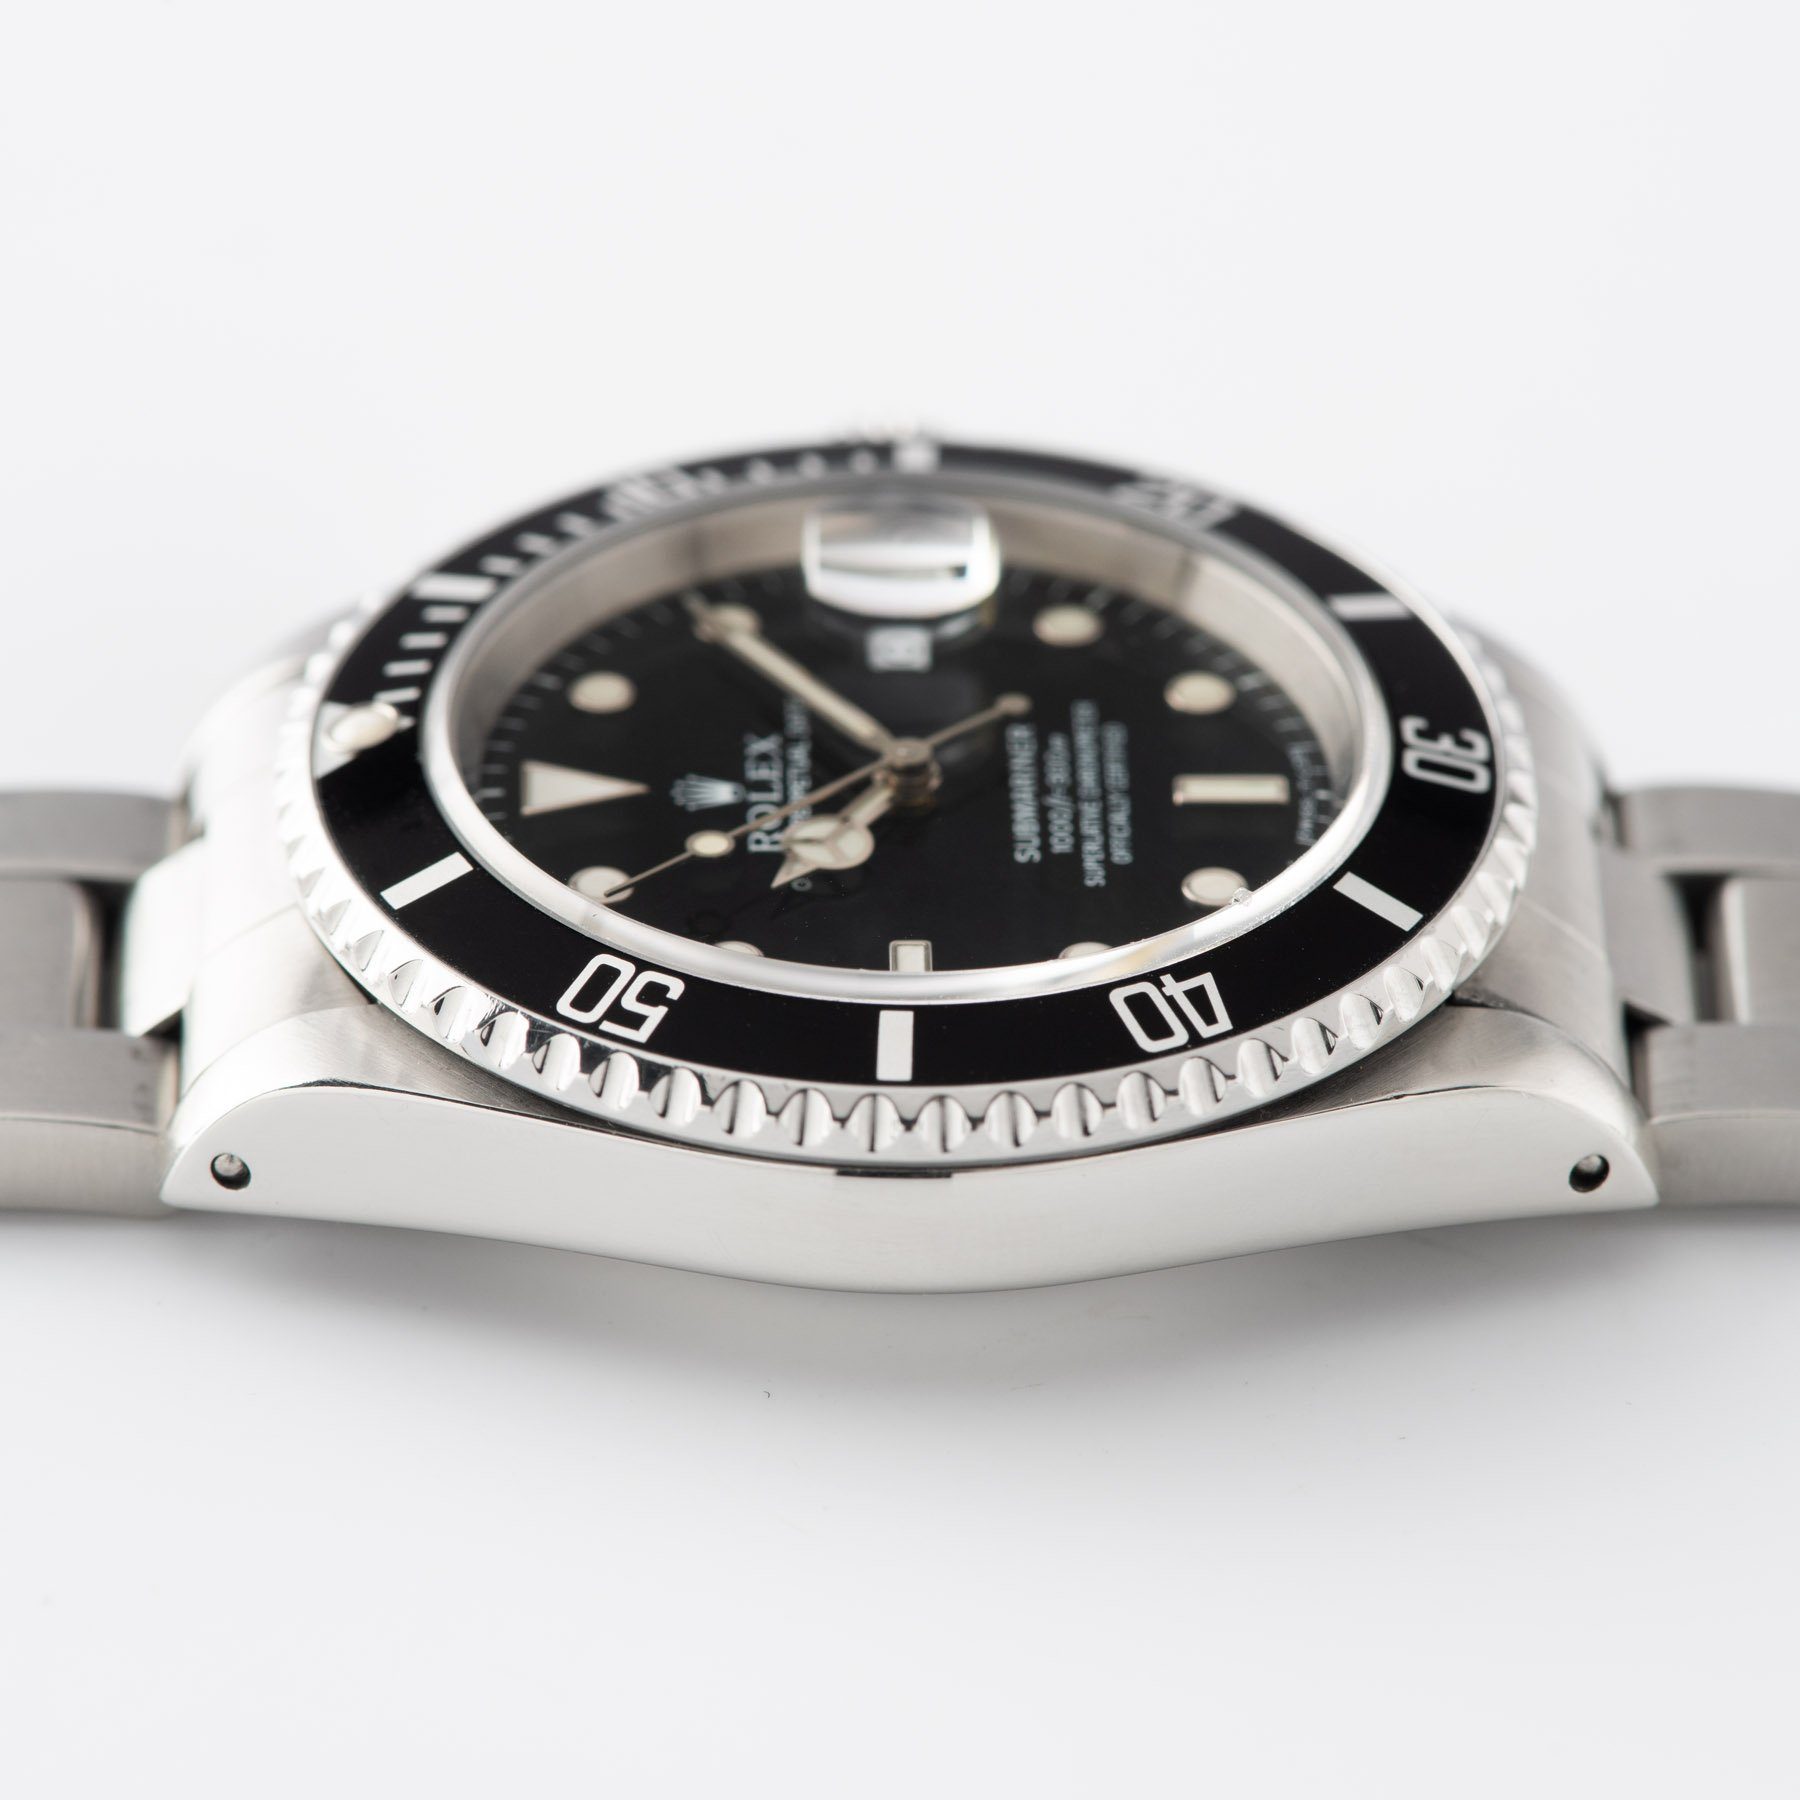 Rolex Submariner Date Reference 16610 with Papers and modern sapphire glass